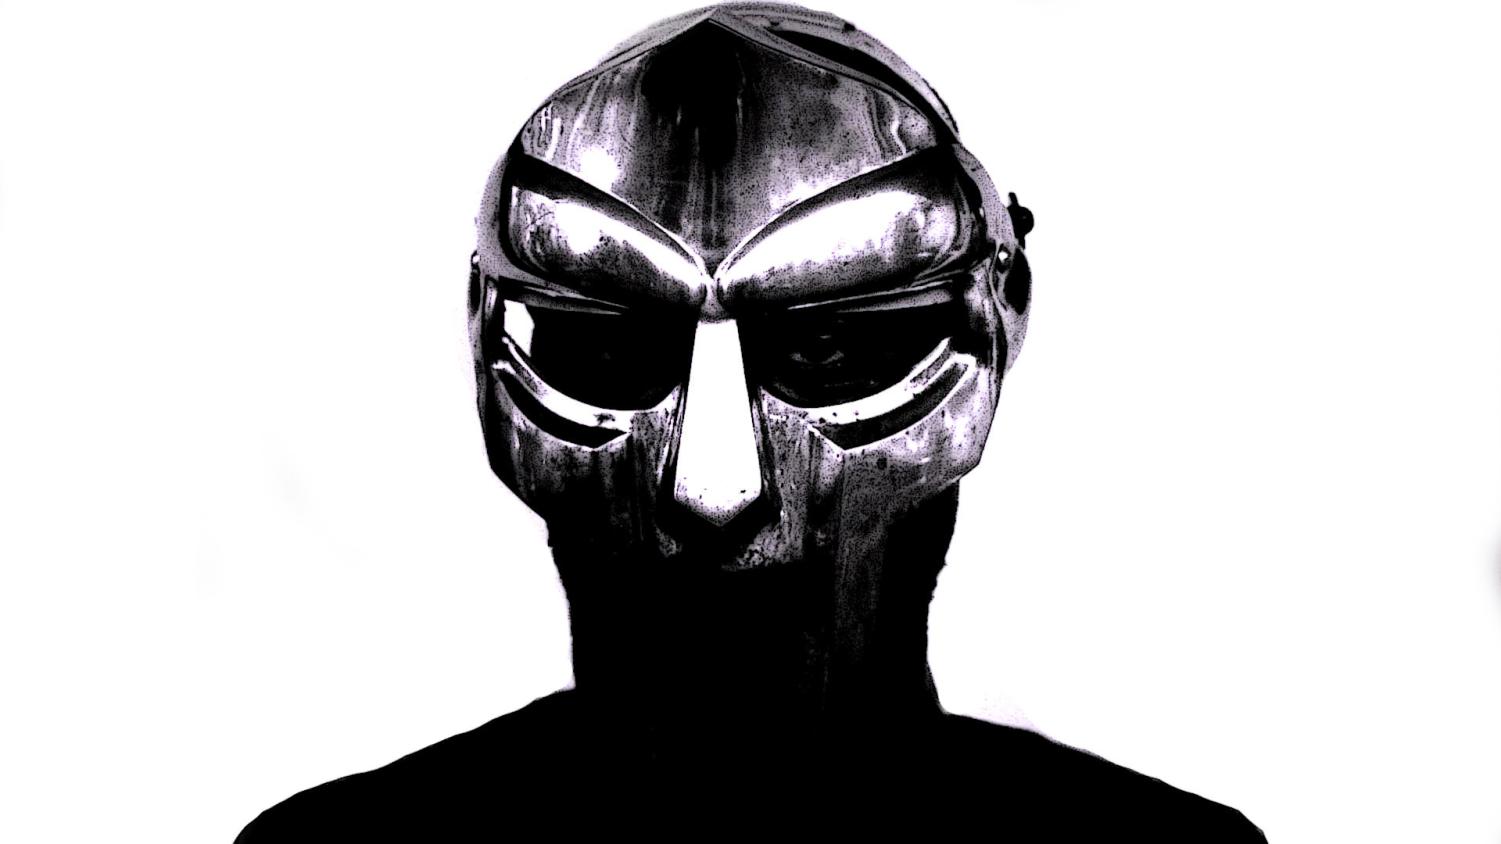 what is the red thing called that mf doom is wearing in the mm